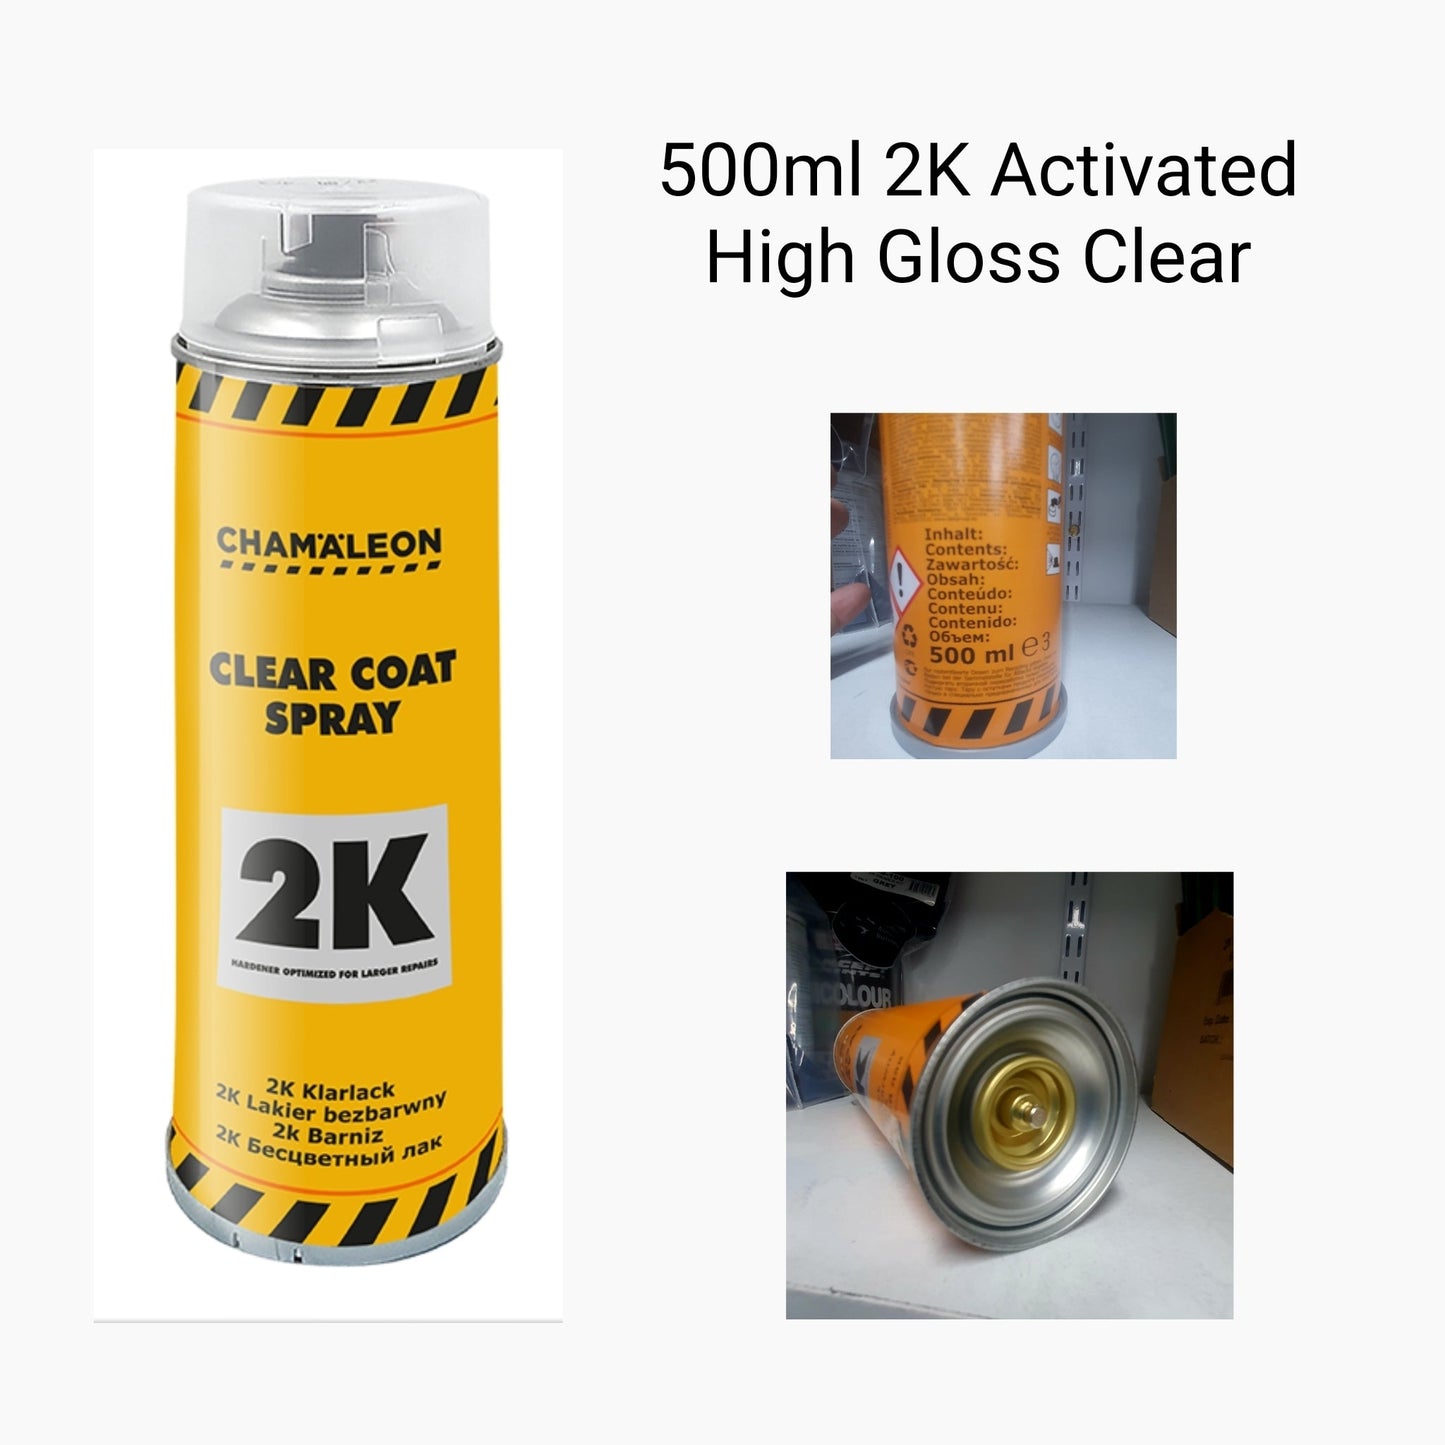 500ml 2k Activated High Gloss Clear Aerosol Paint